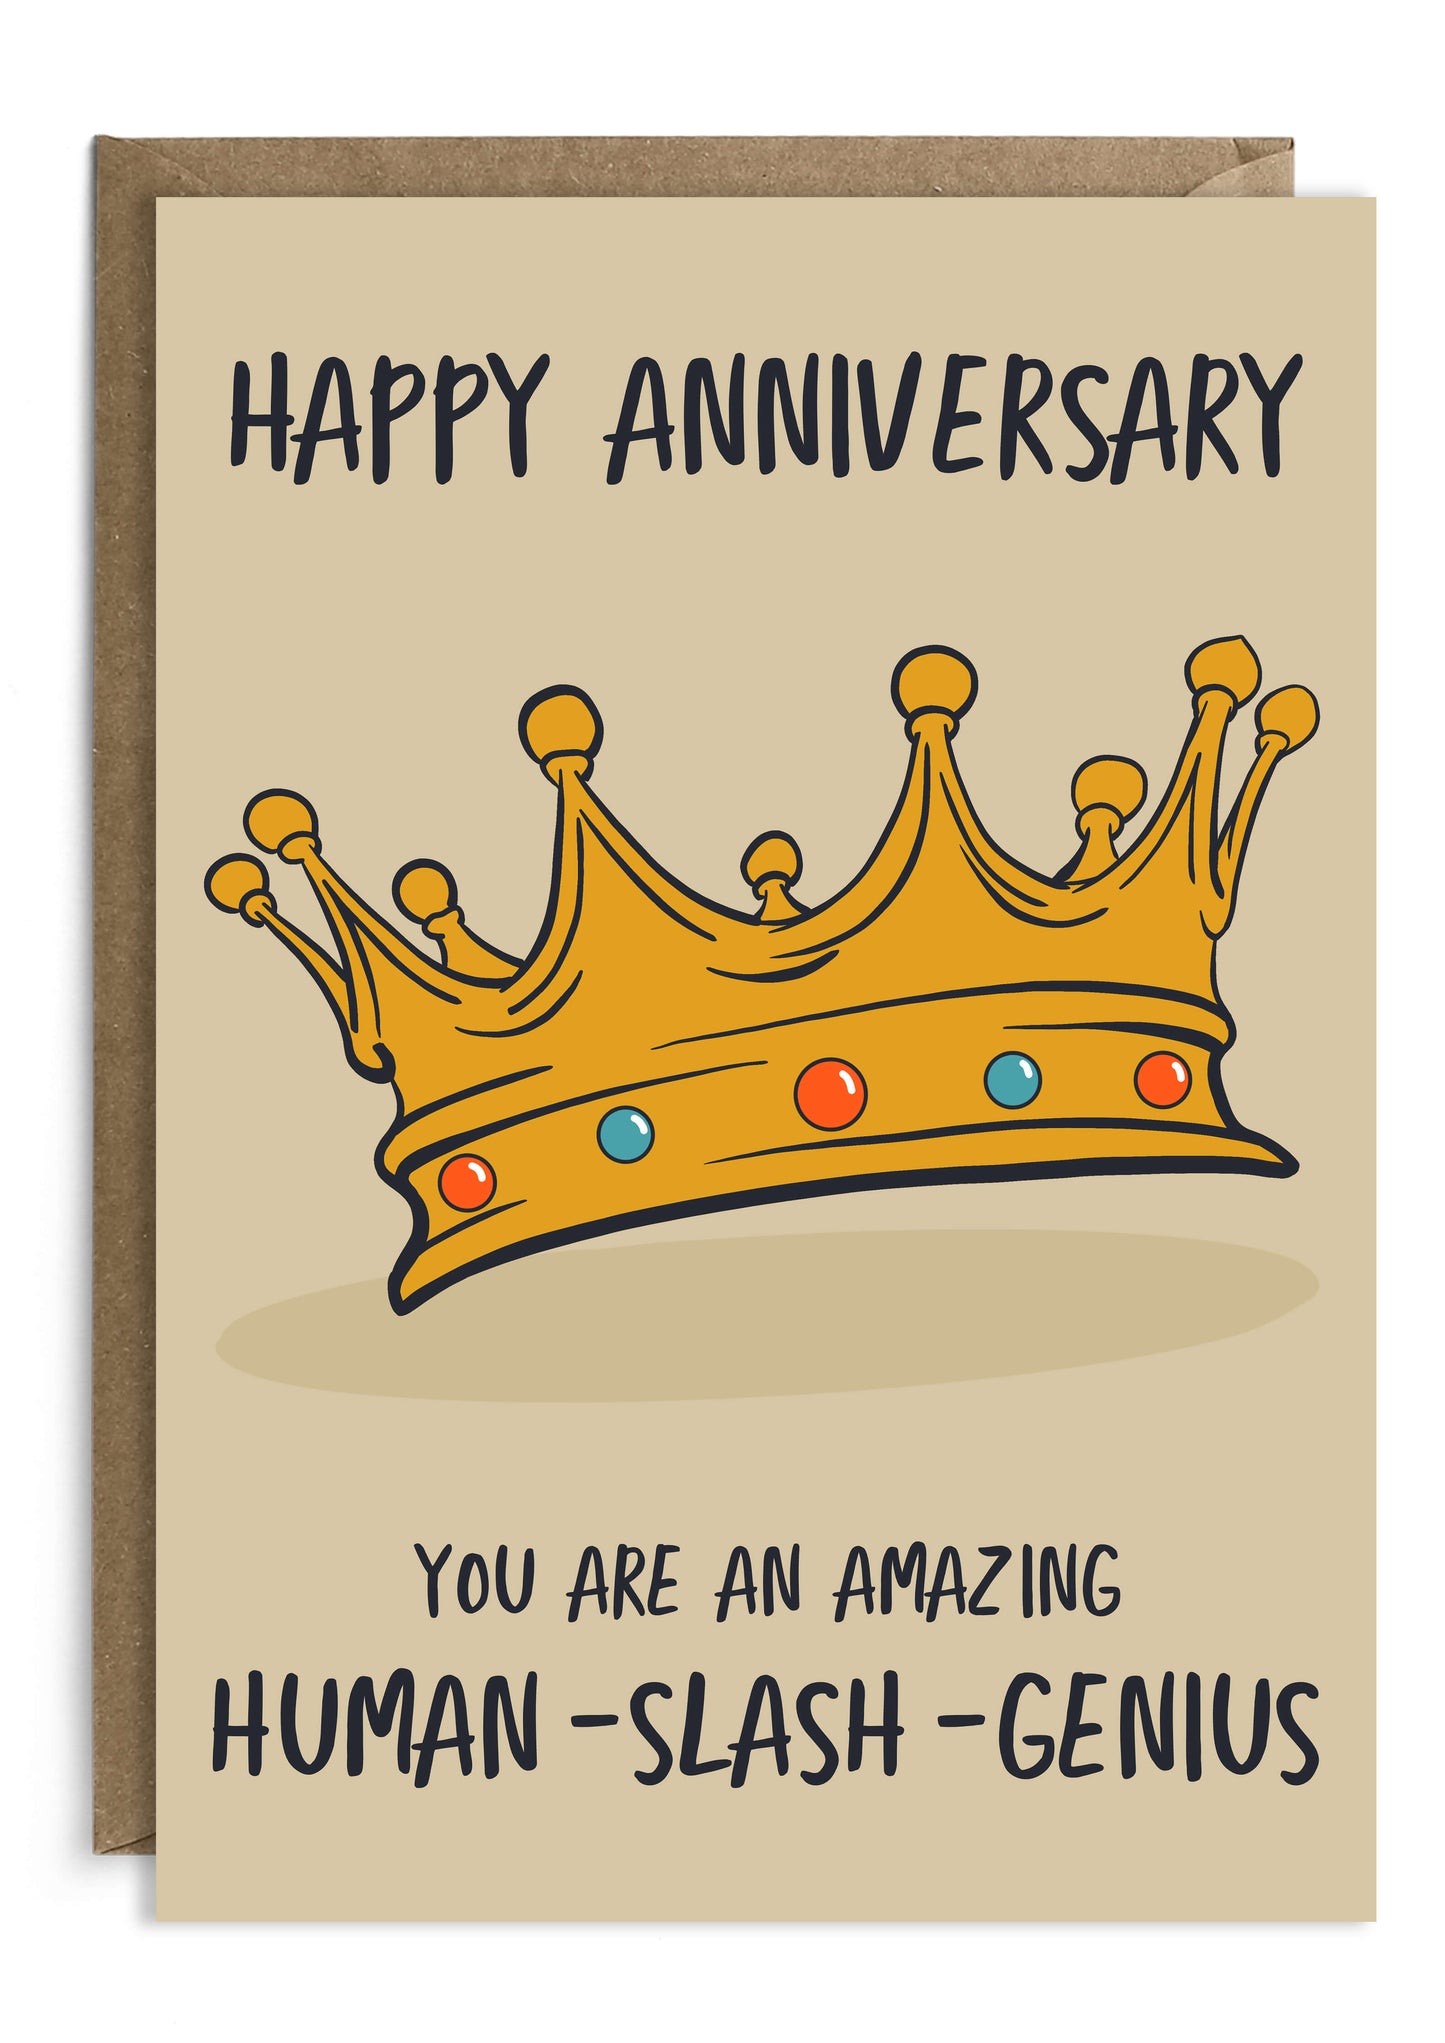 Happy Anniversary You're an amazing human slash genius card. Inspired by Brooklyn 99. Printed on thick card and comes with a spare recycled Kraft envelope